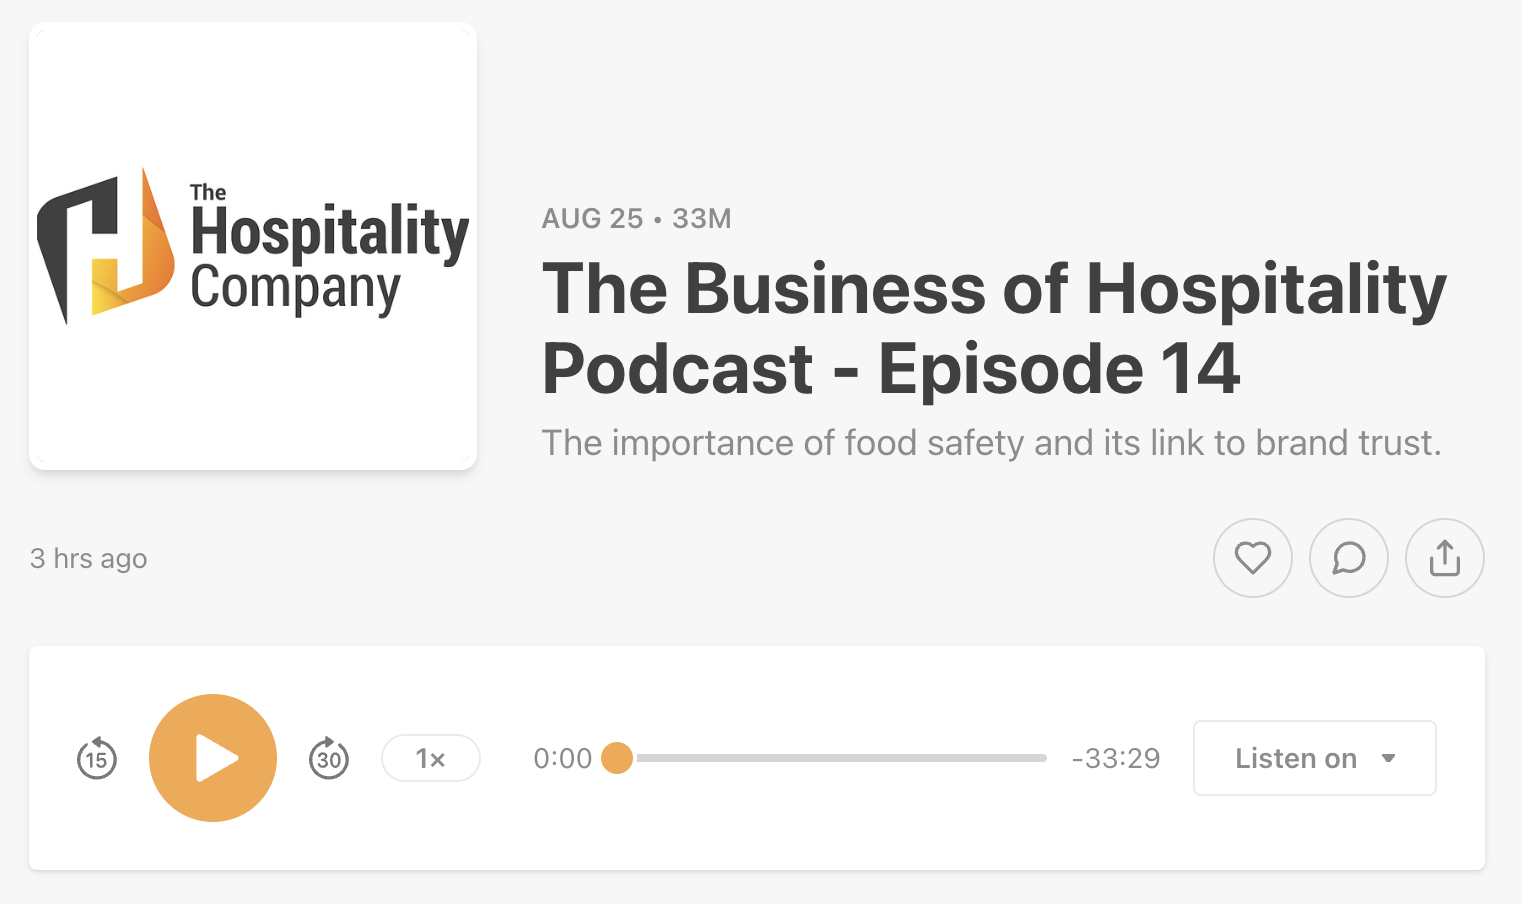 The Business of Hospitality Podcast - Episode 14